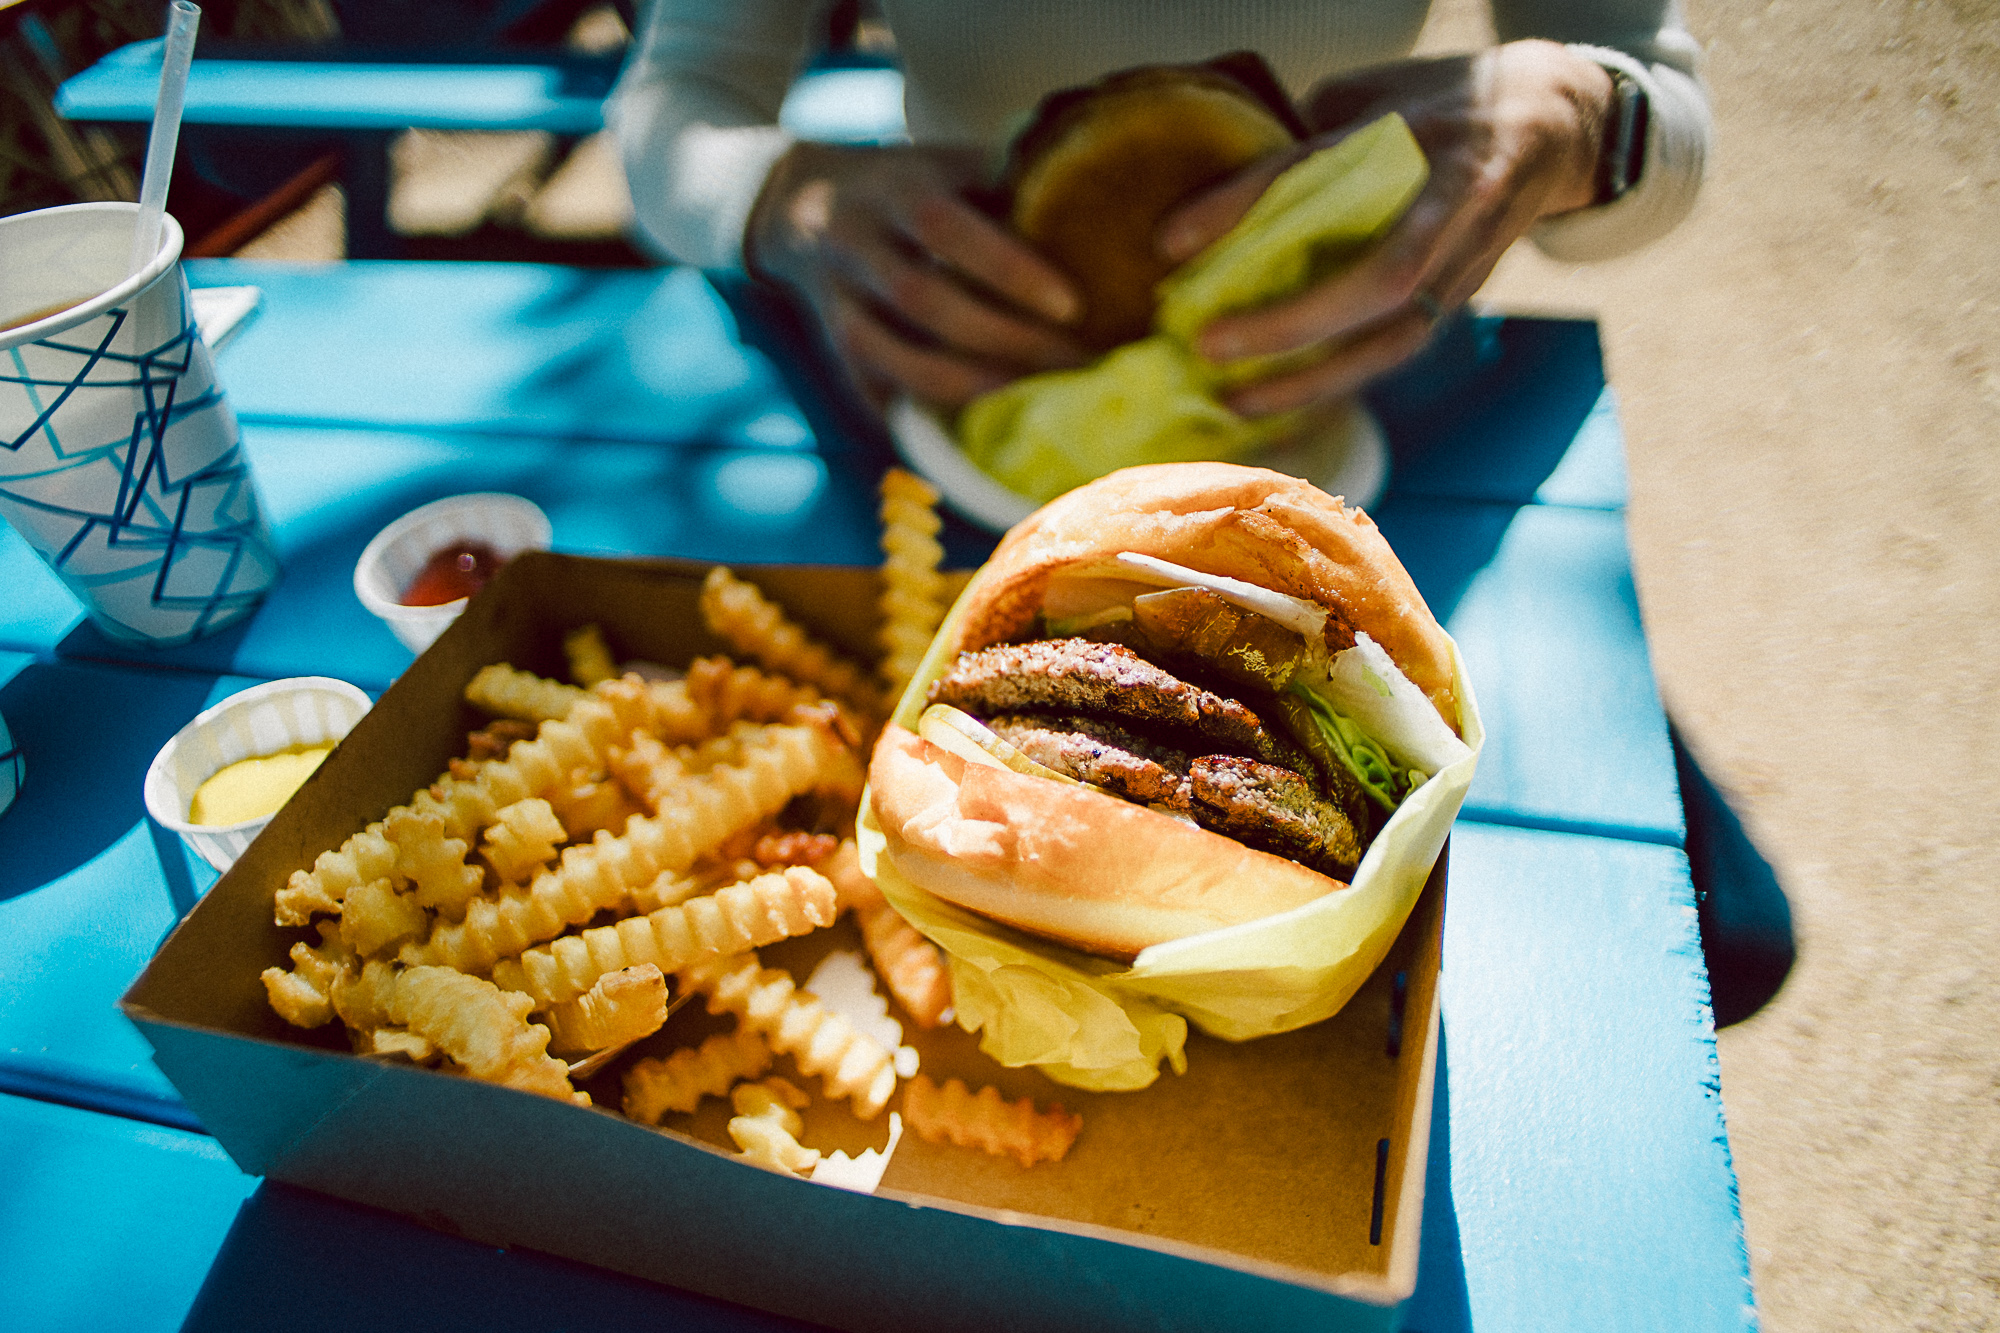 A burger in paper wrap and fries in a tray on a blue picnic table.